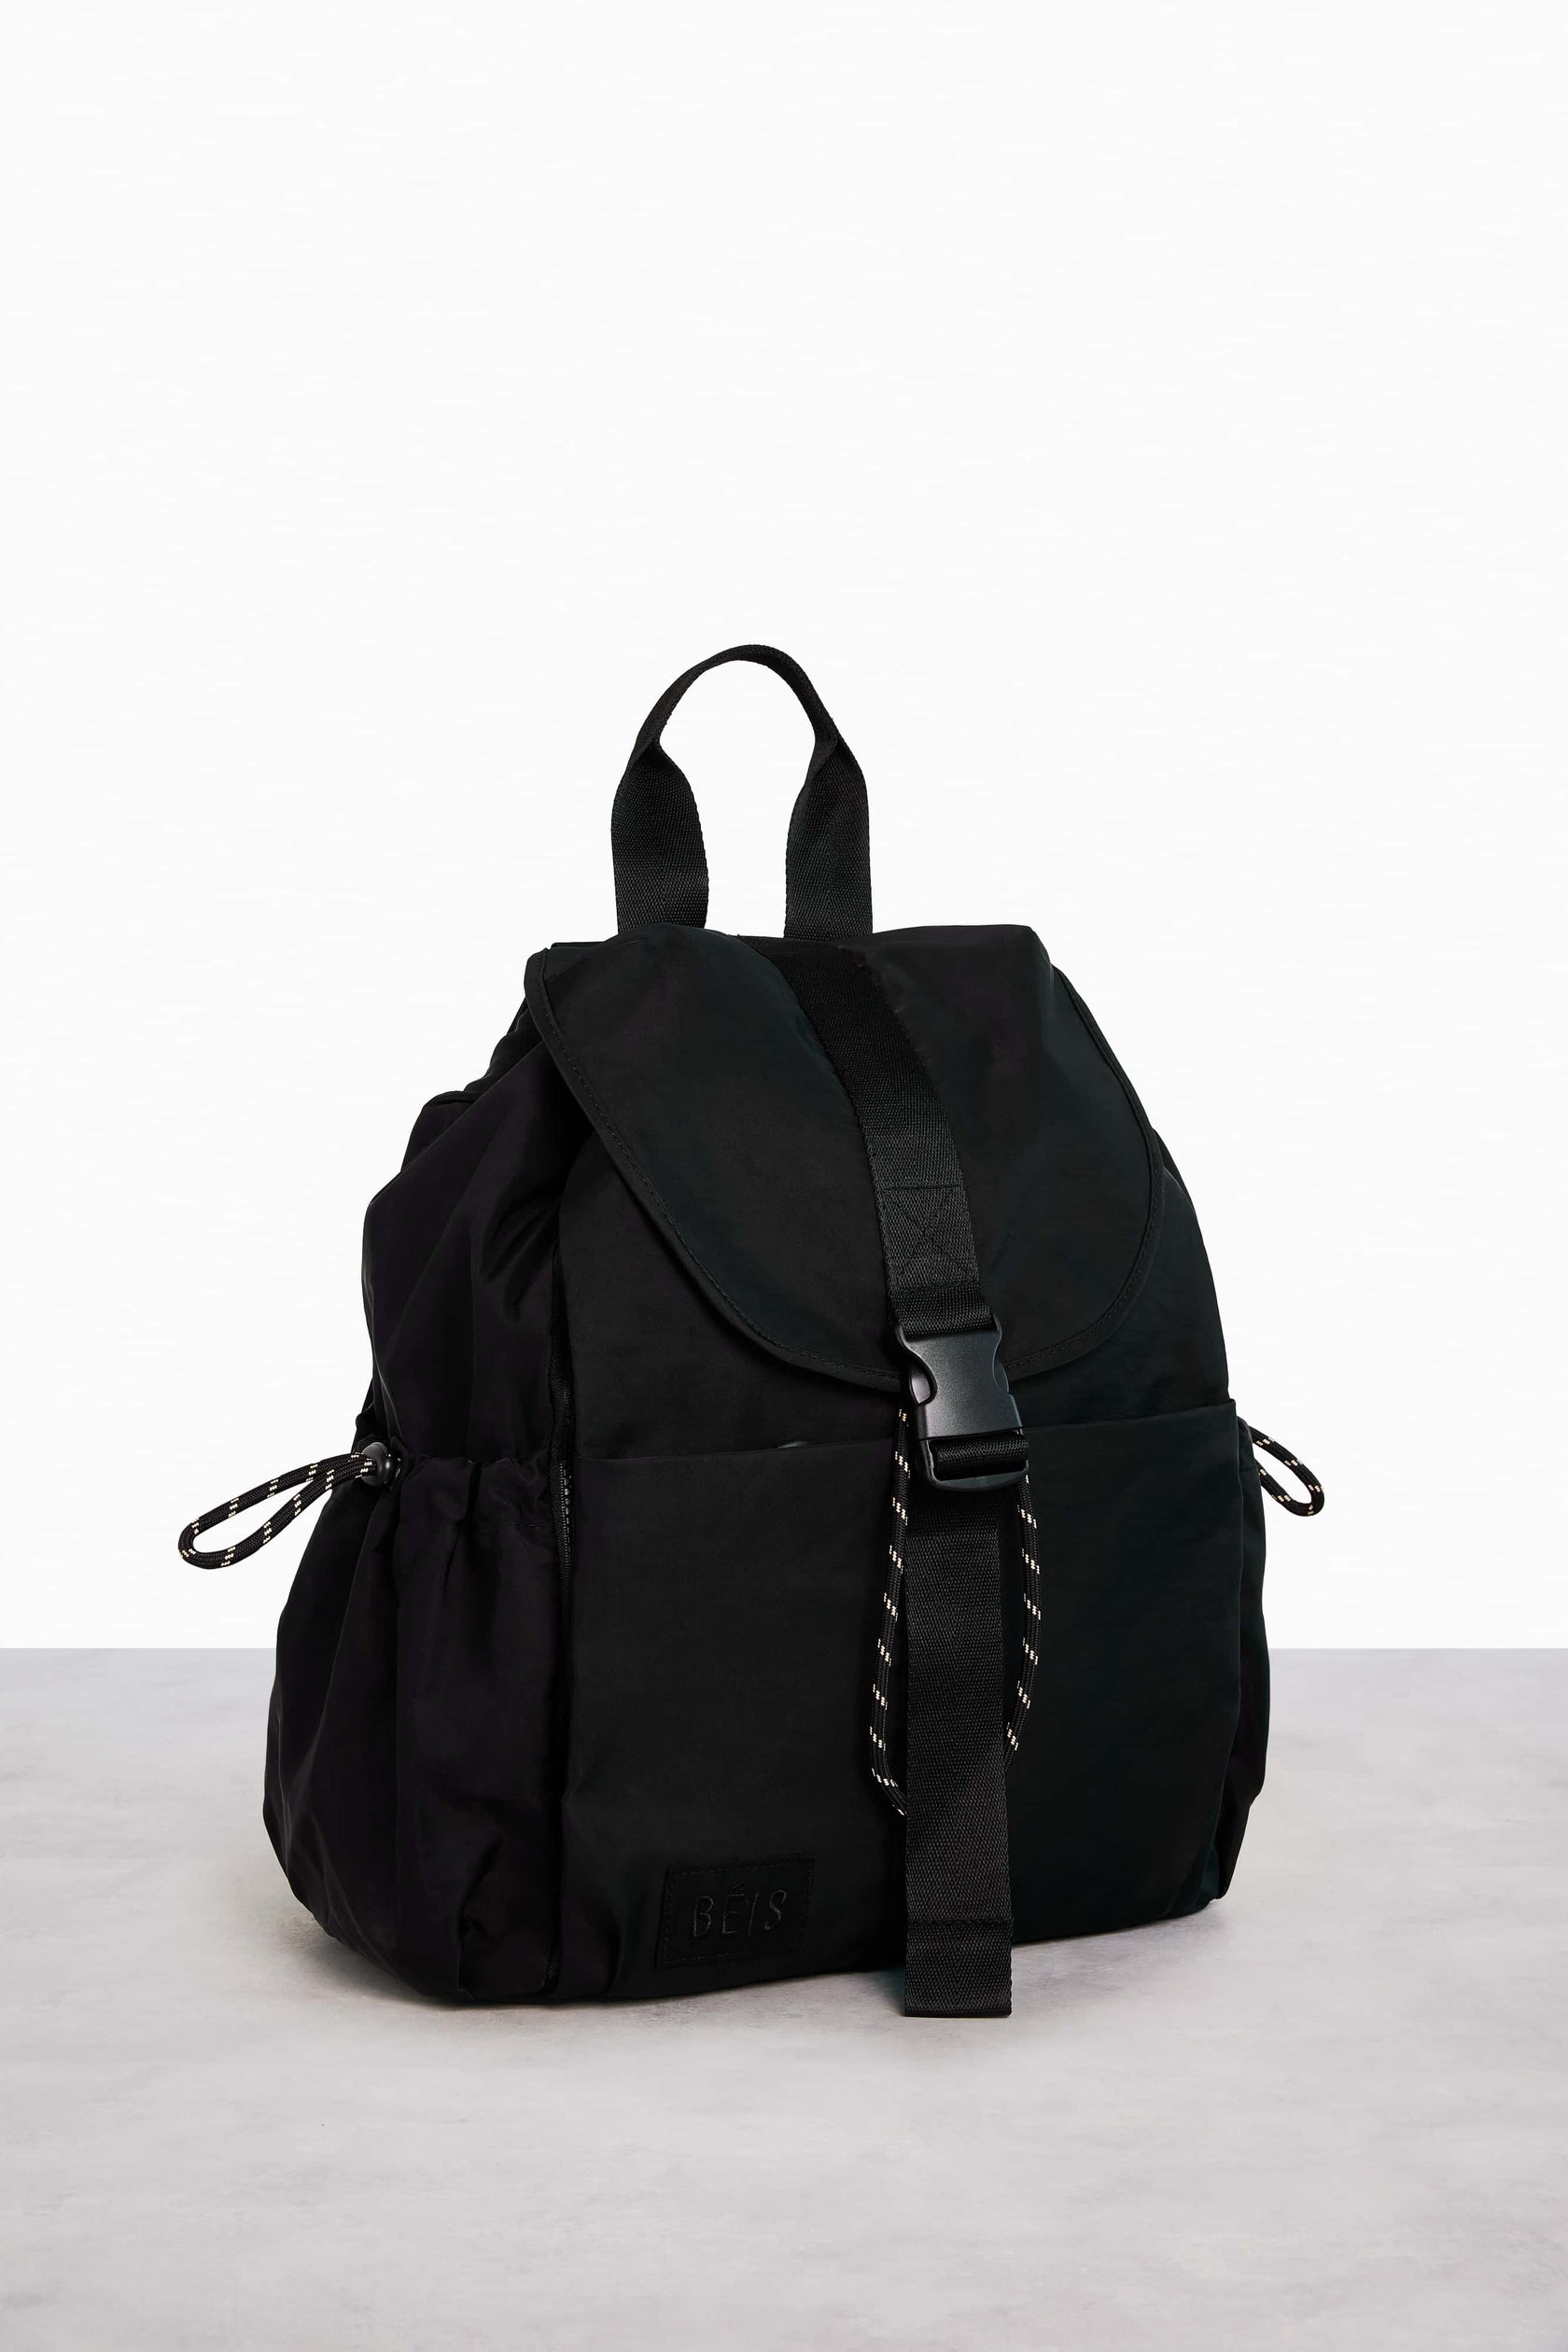 BÉIS 'The Sport Backpack' in Black - Chic Tennis Inspired Backpack